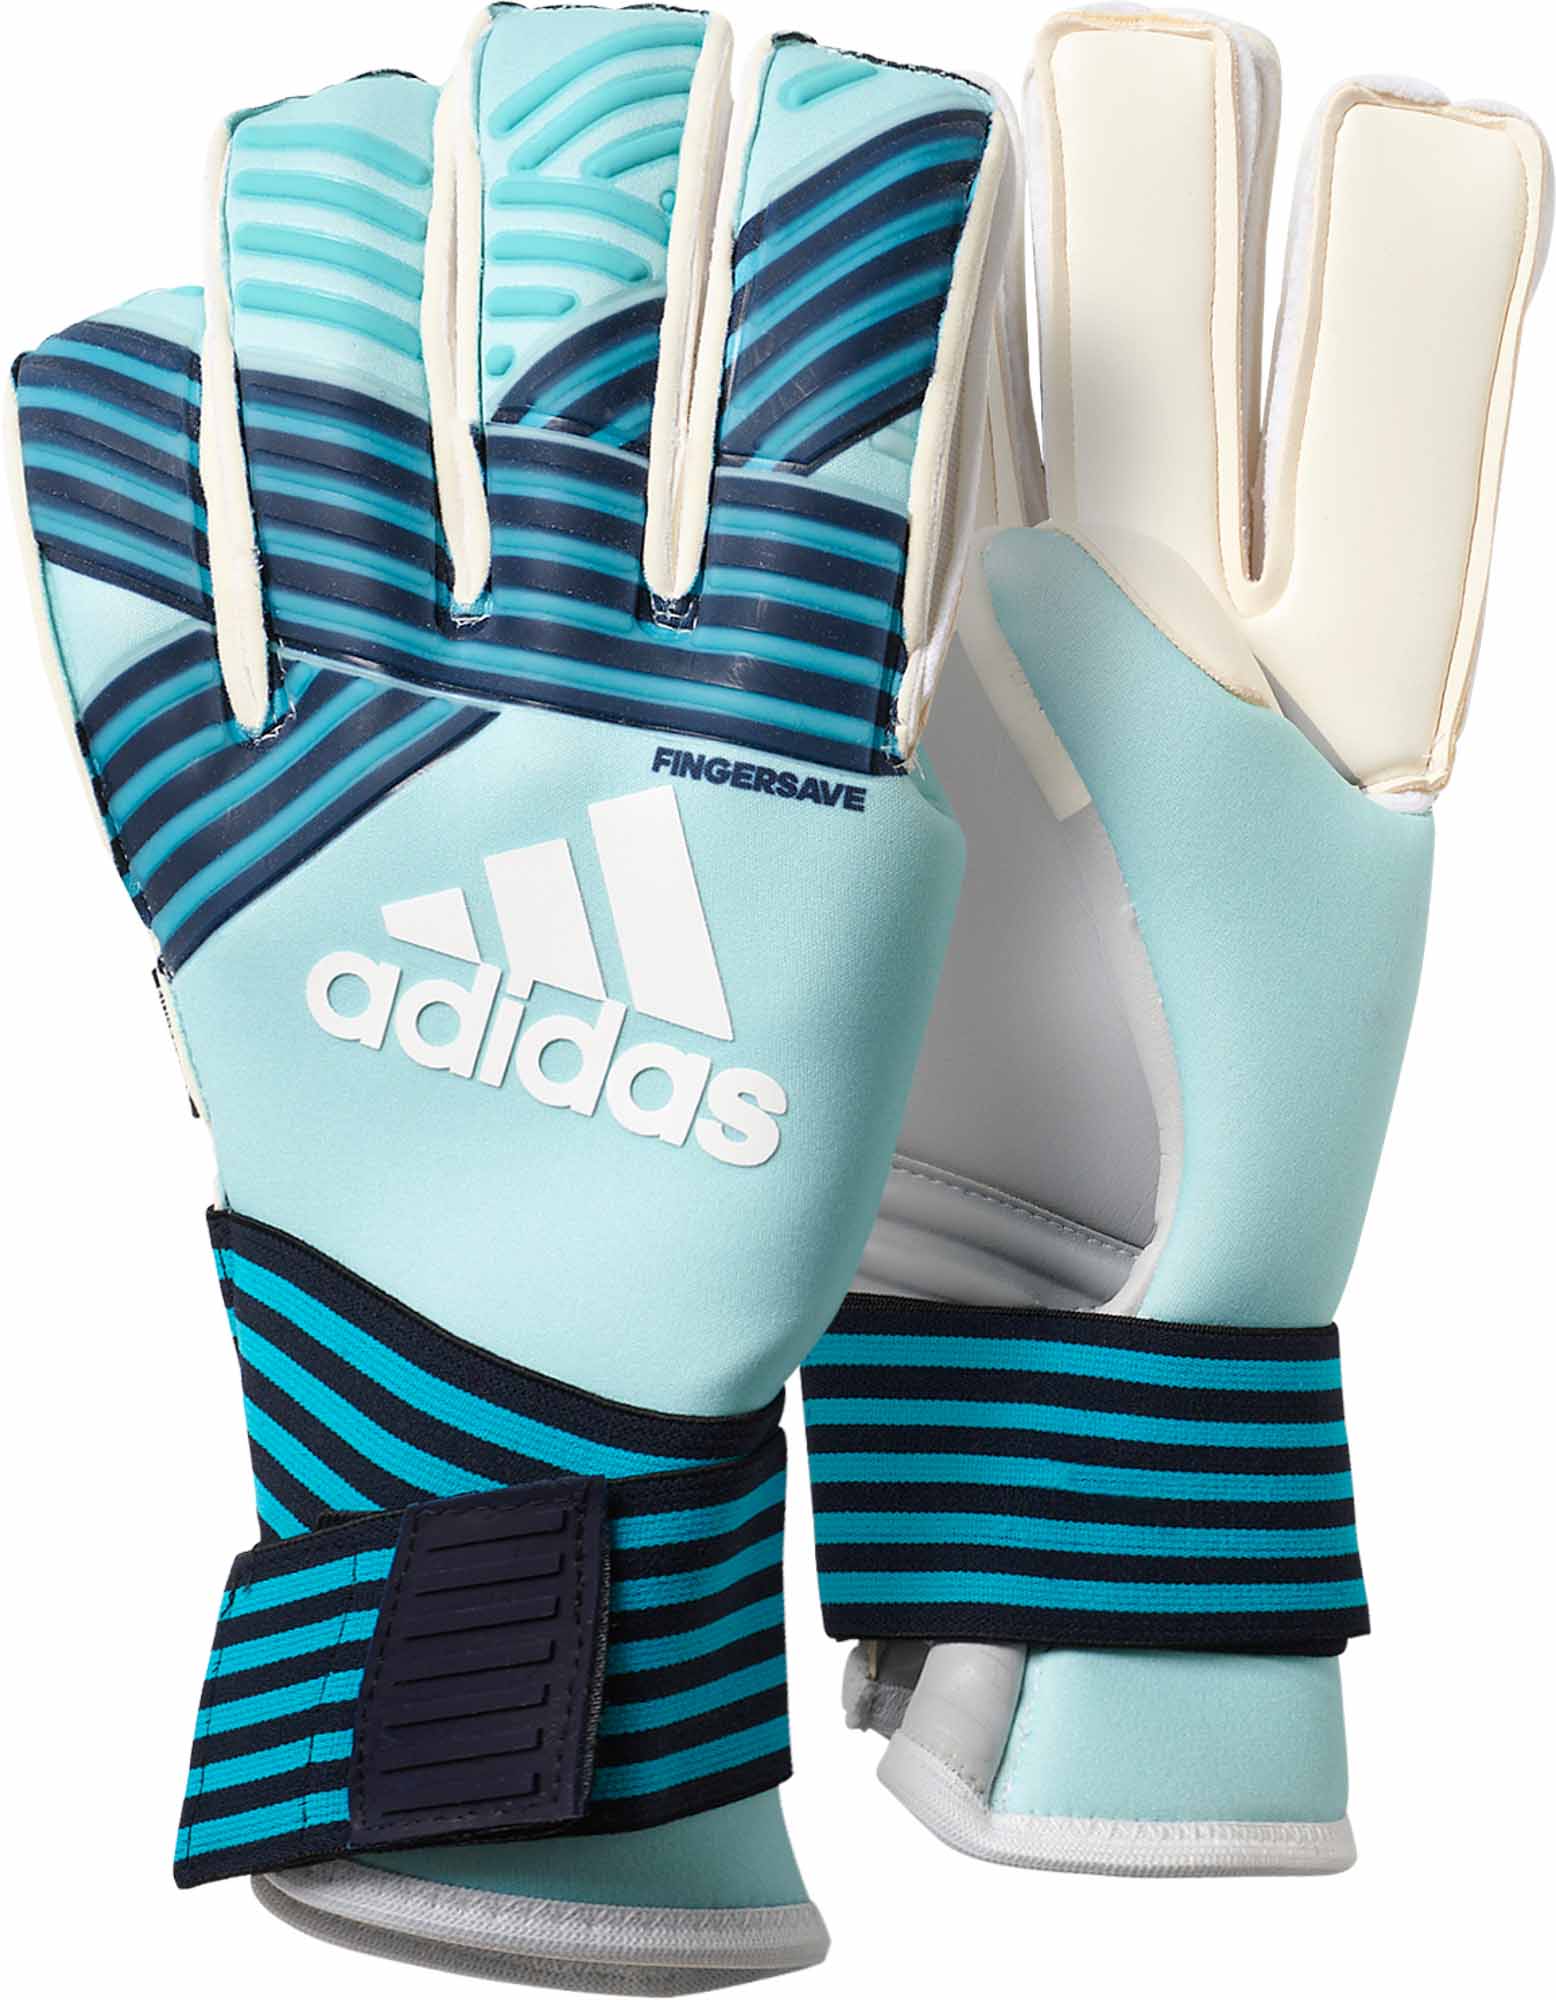 adidas ace keeper gloves